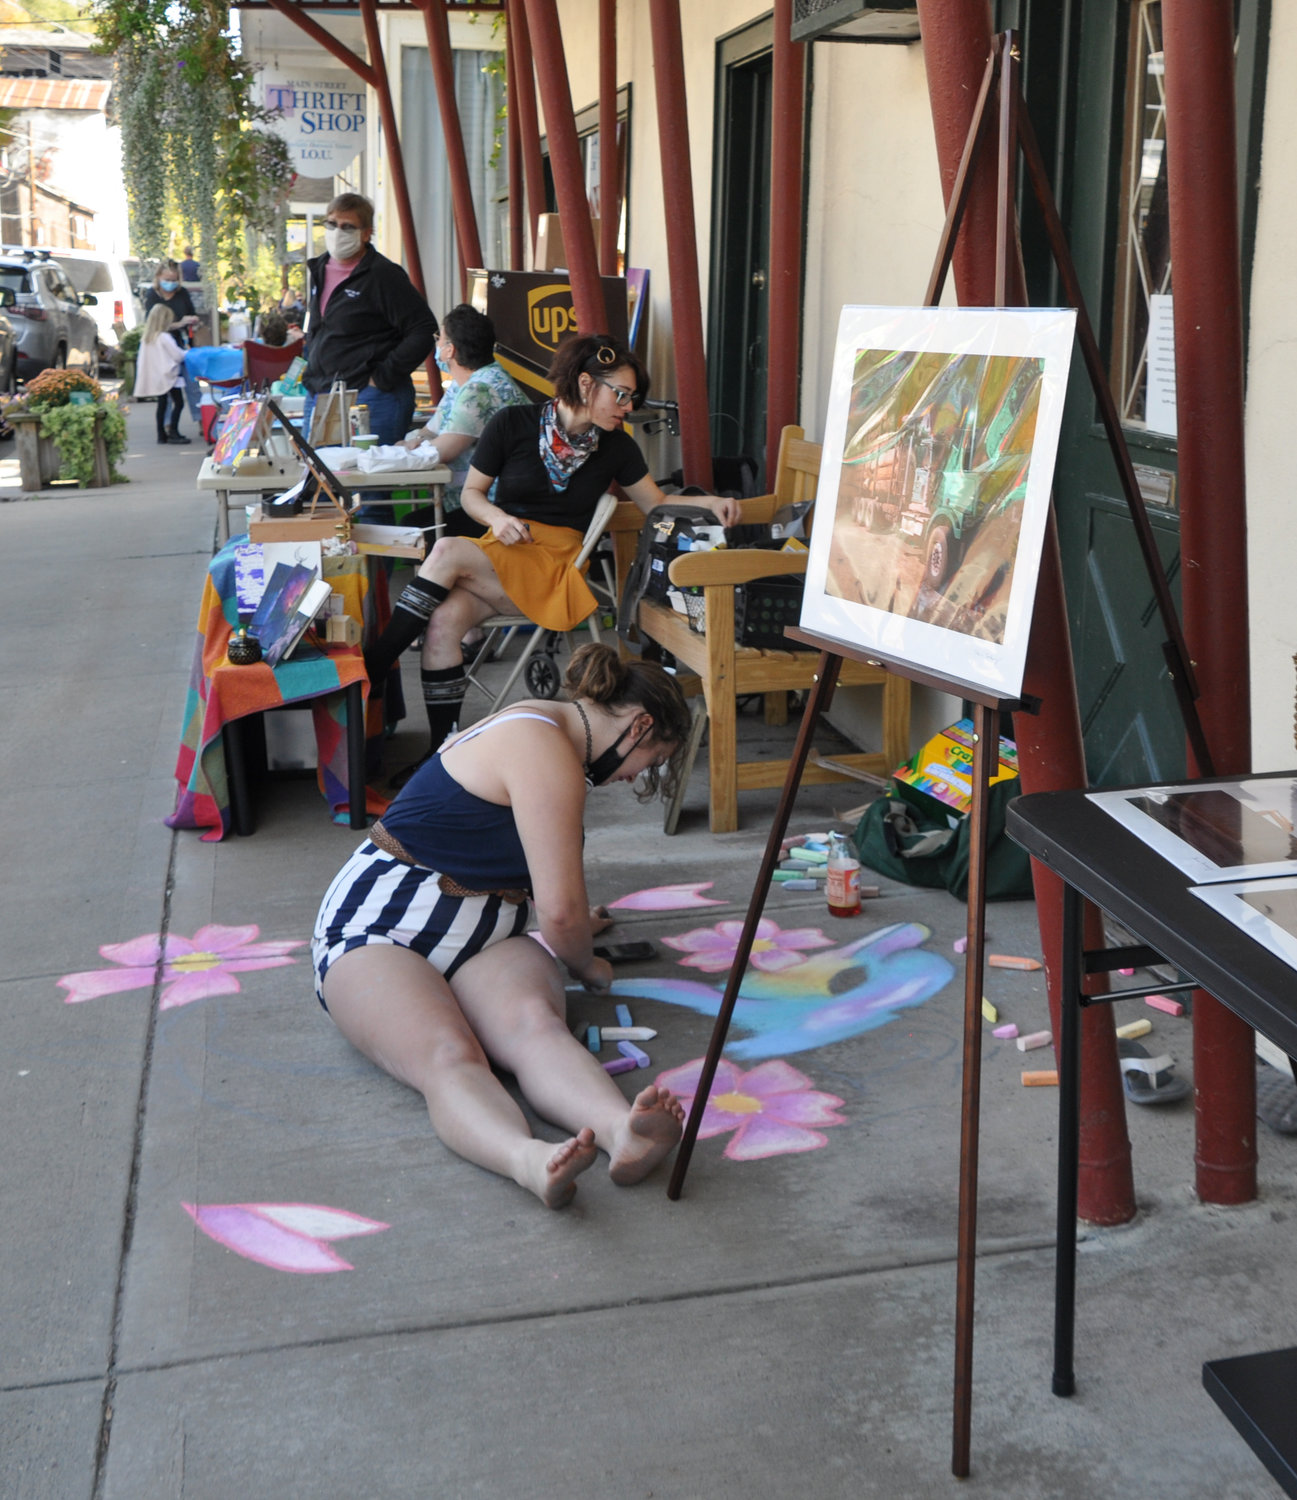 Artists lined the streets of Callicoon, NY last weekend where I observed some hard at work—from a distance, of course.